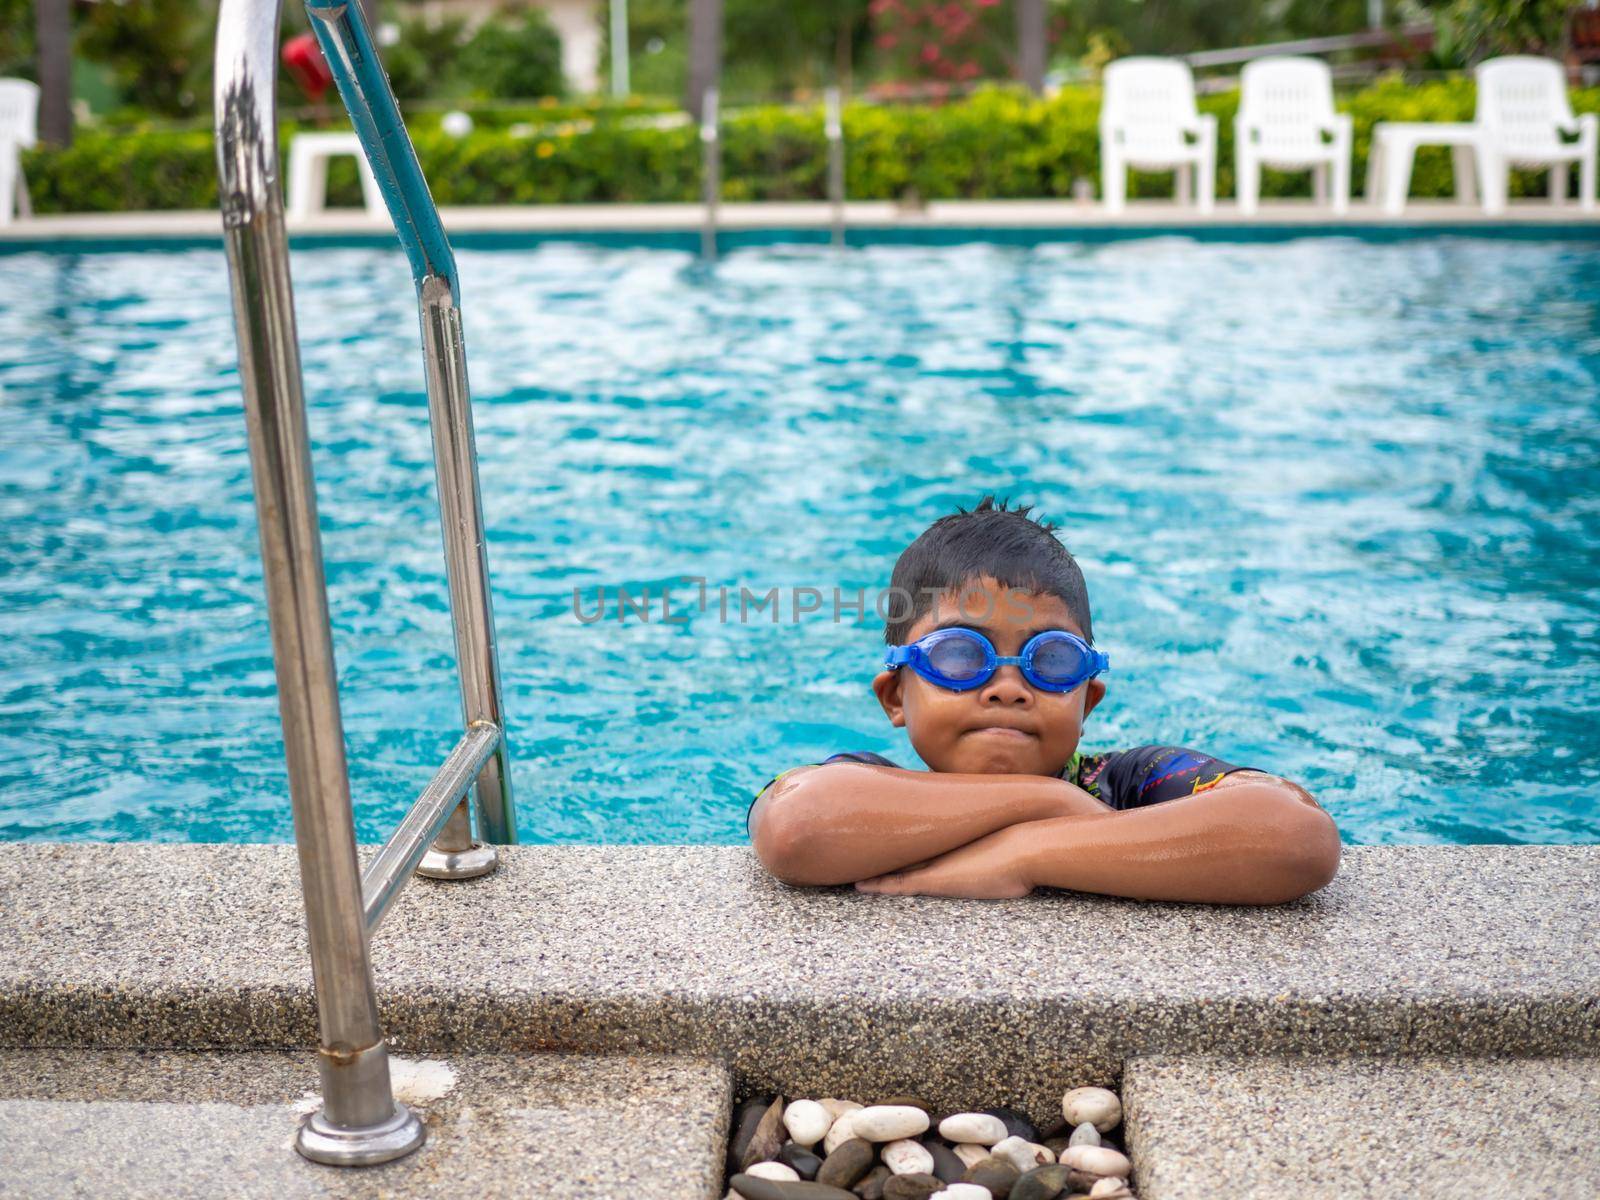 The boy wearing swimsuits and glasses Smile while perched on the edge of the swimming pool. by Unimages2527